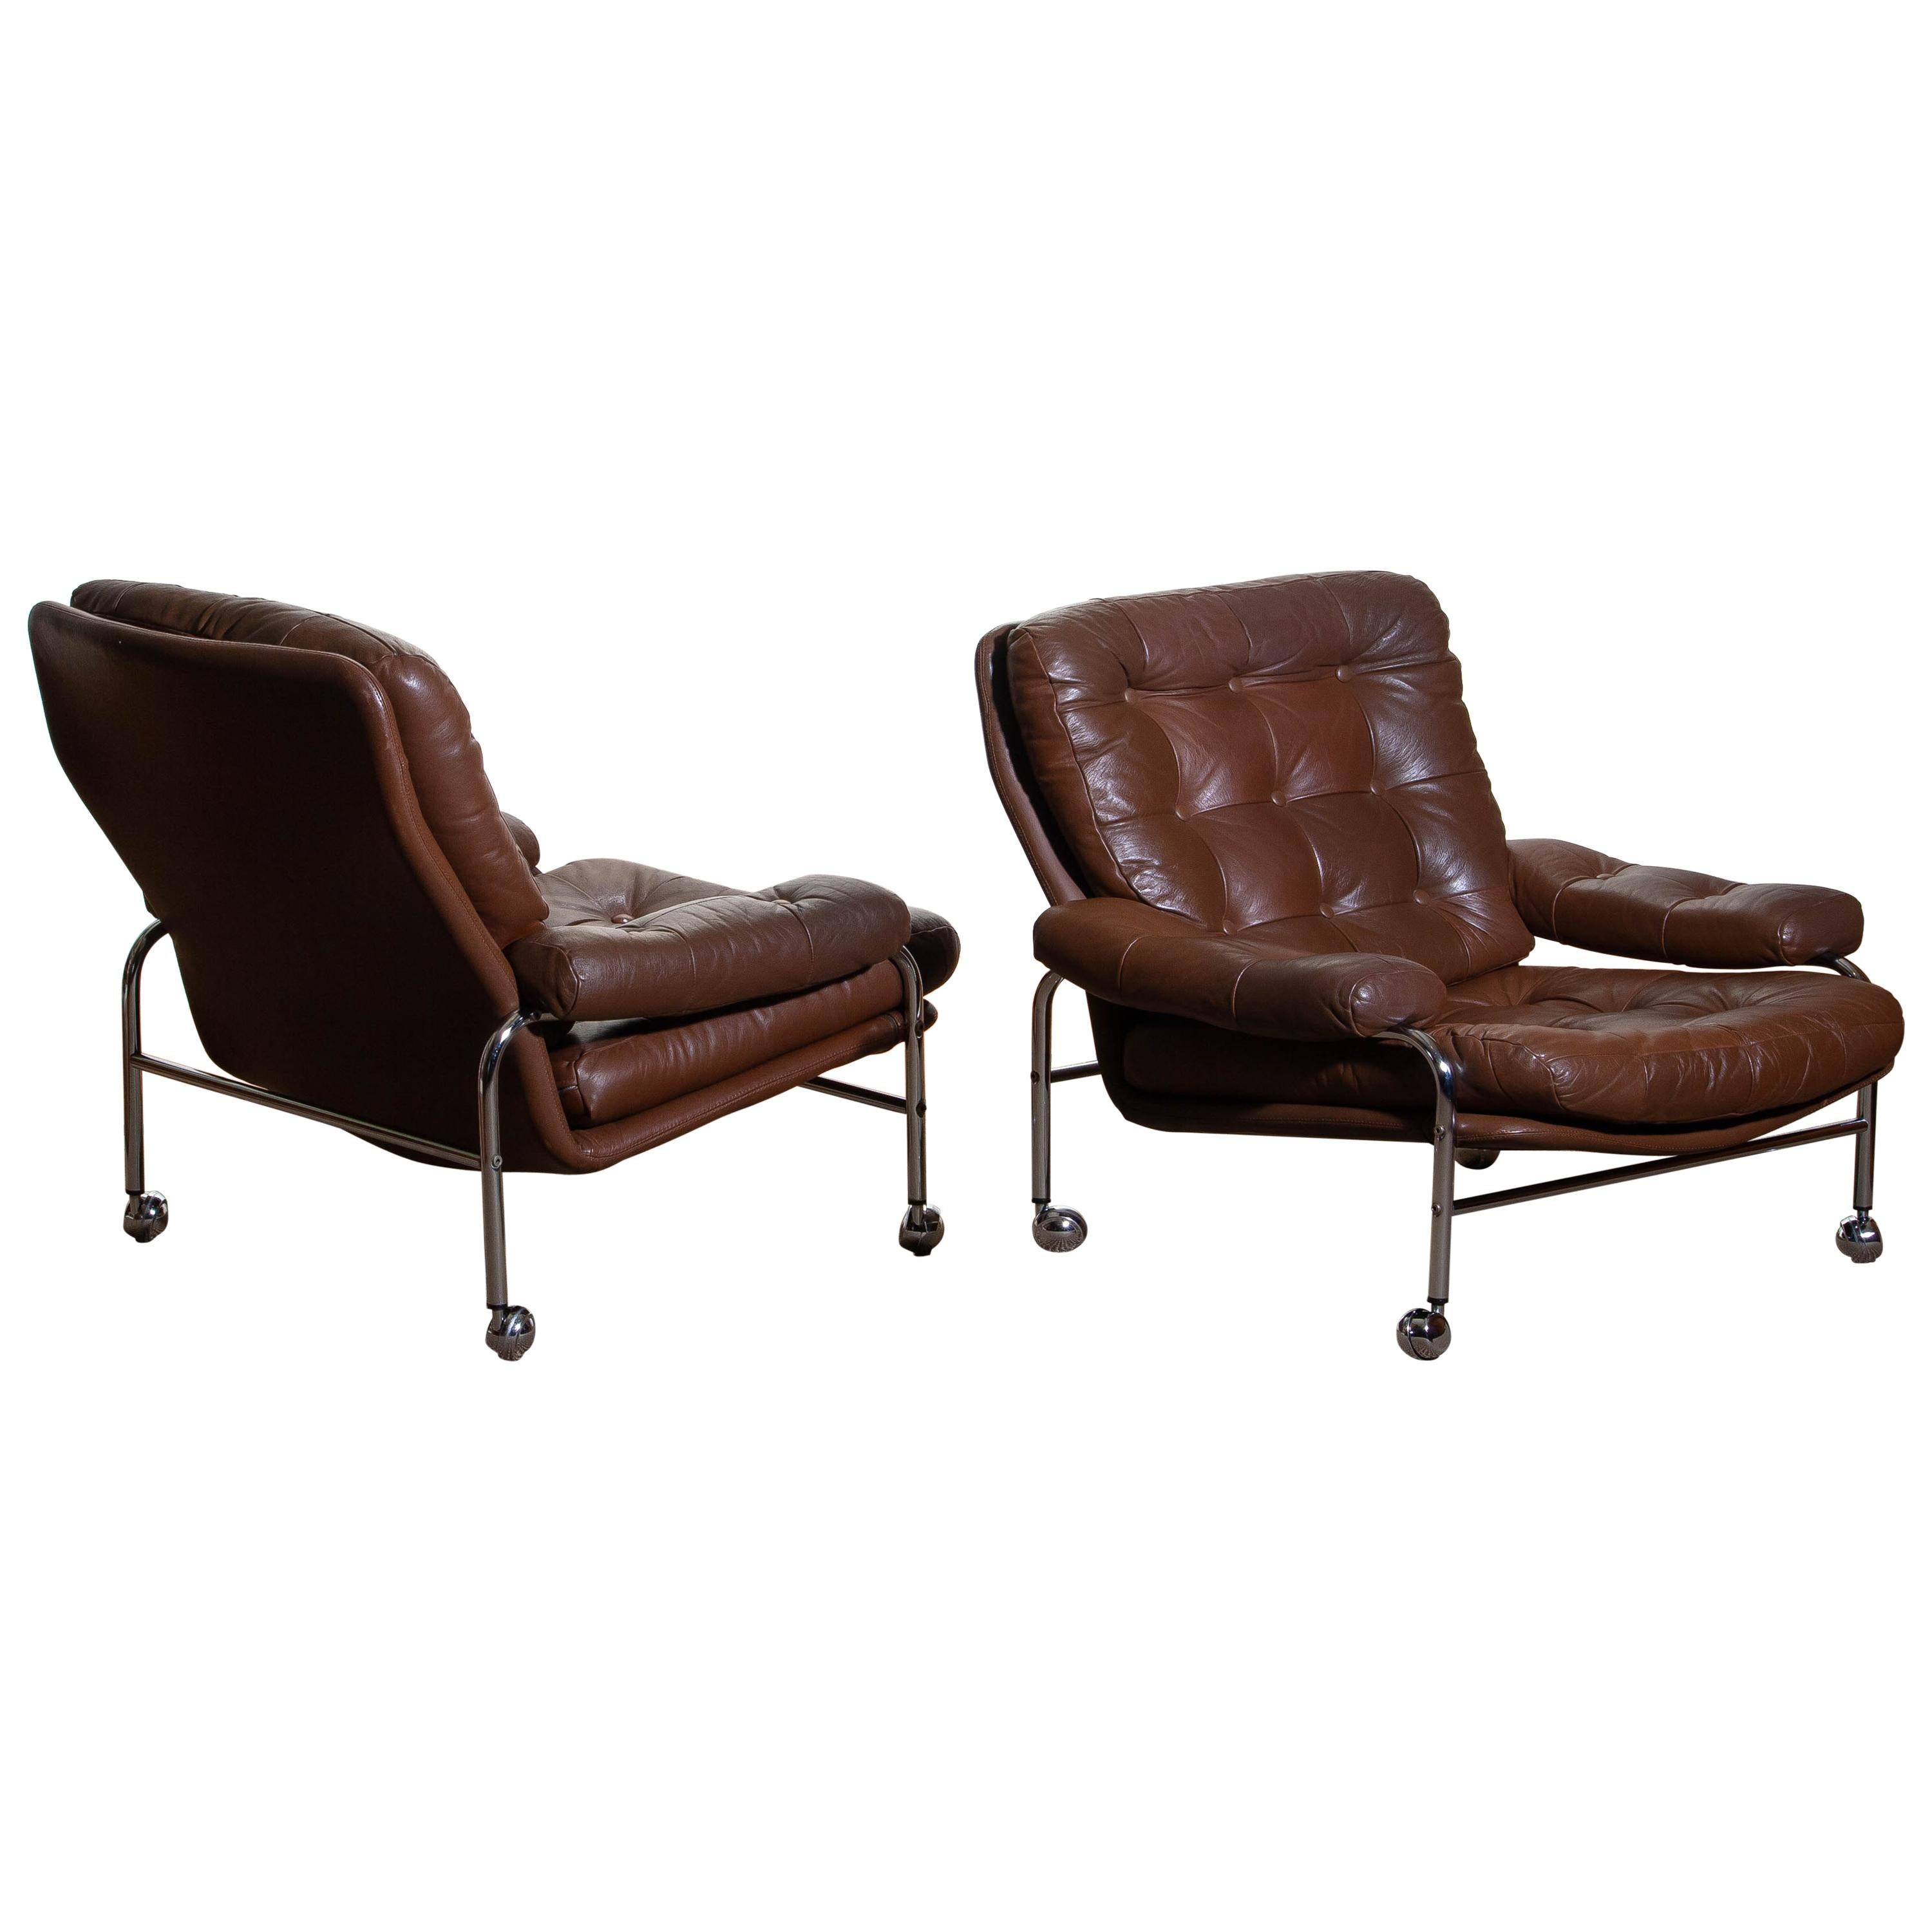 Late 20th Century 1970s, Chrome and Brown Leather Lounge Chairs by Scapa Rydaholm, Sweden